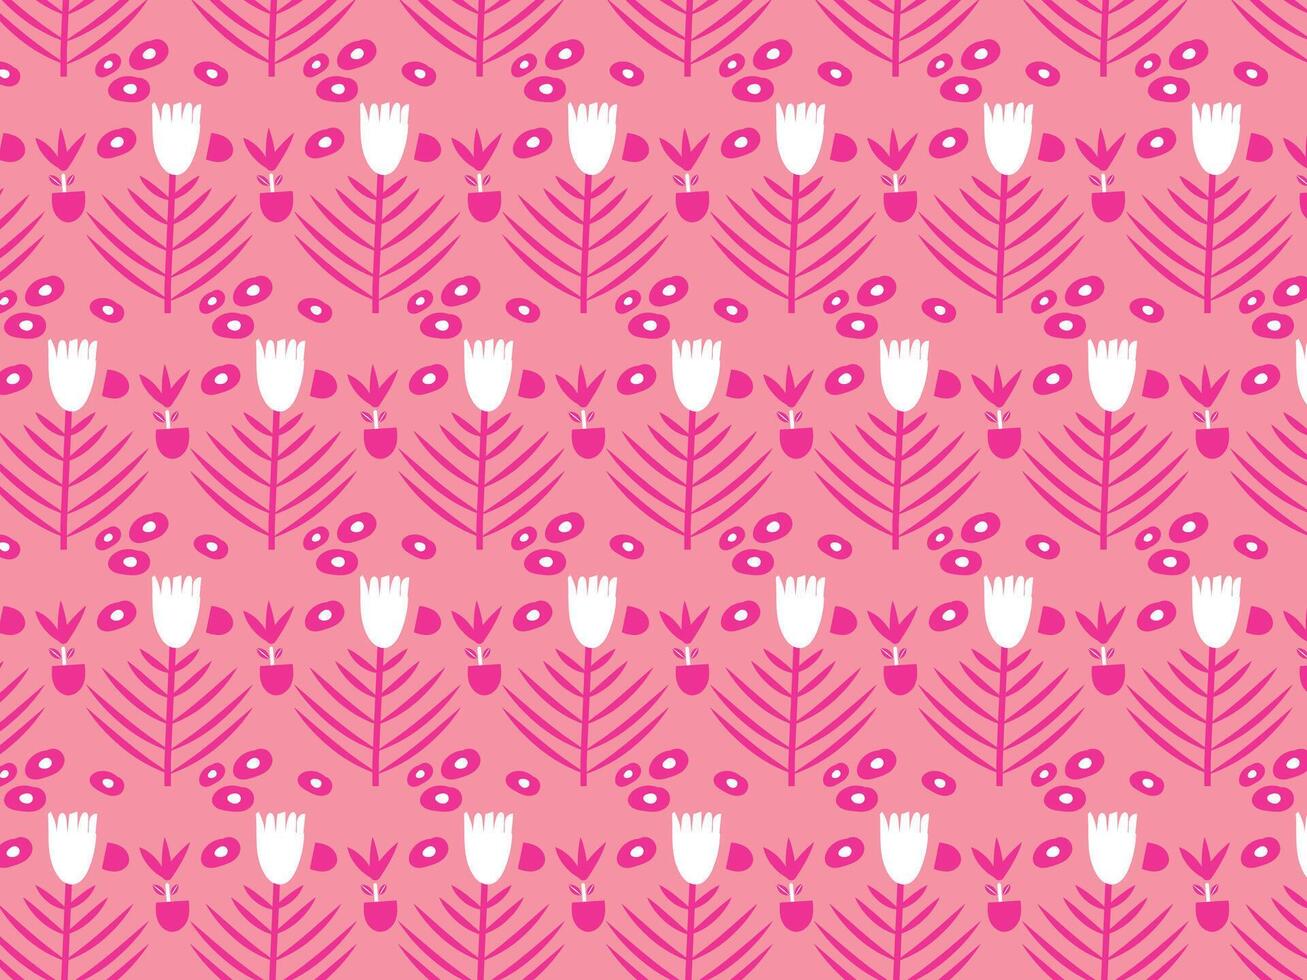 Abstract seamless pink and white floral flower pattern vector